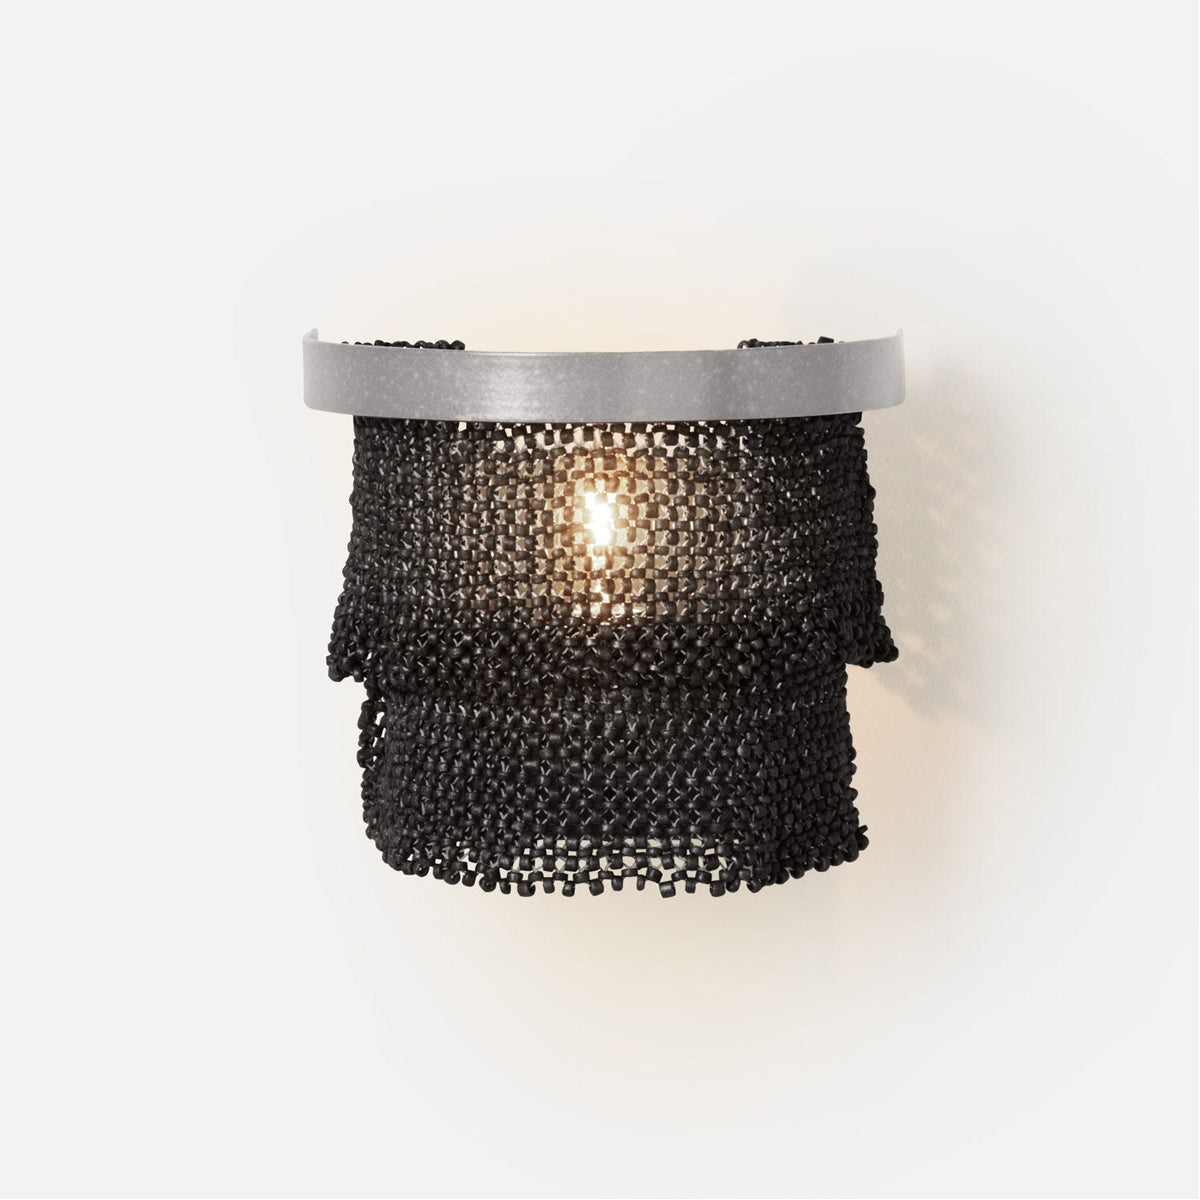 Made Goods Patricia Sconce Tiered Woven Coco Bead sconce